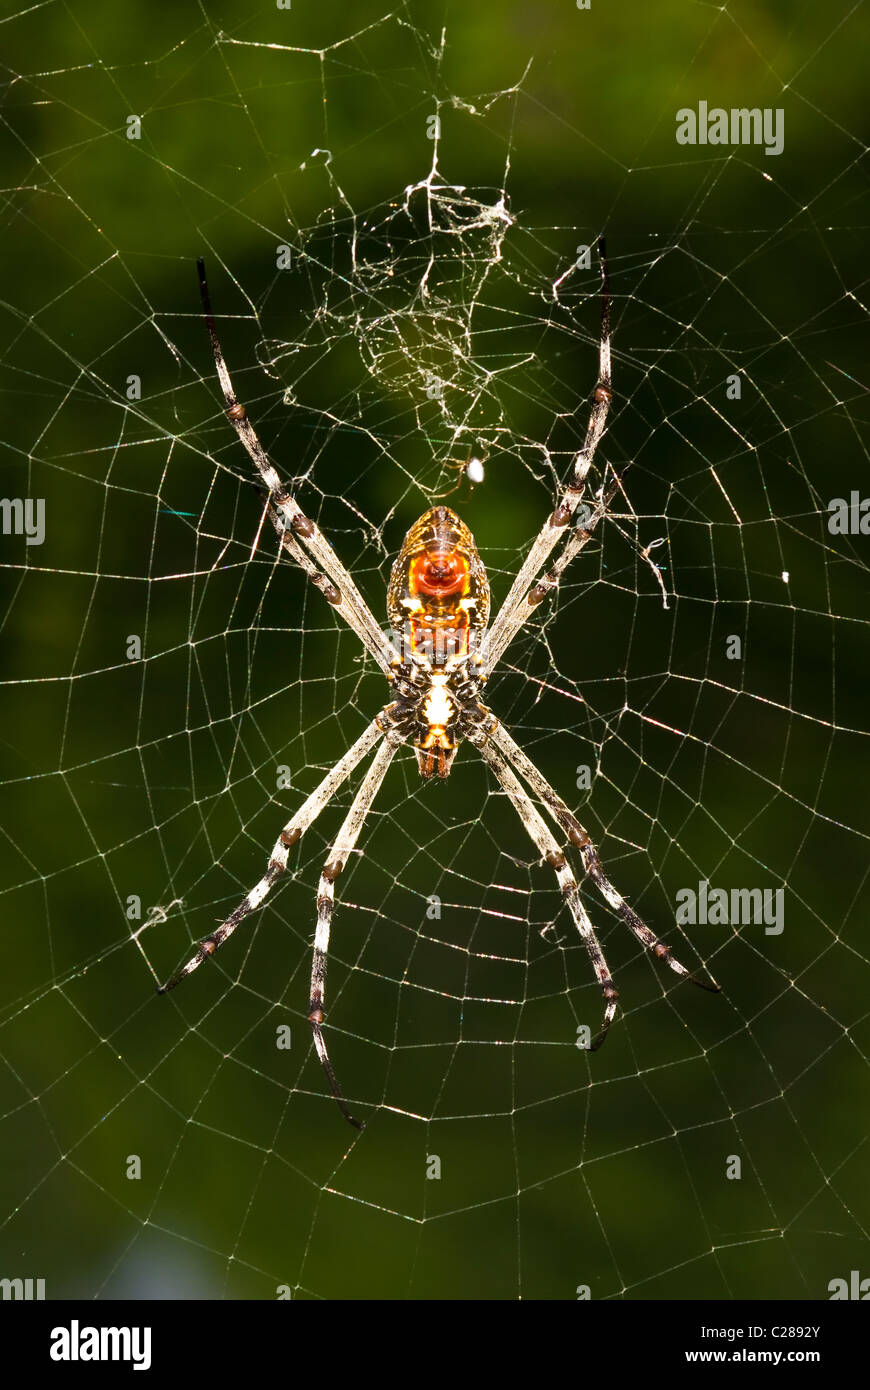 A St. Andrew's Cross spider resting in the center of its silk org web. Stock Photo